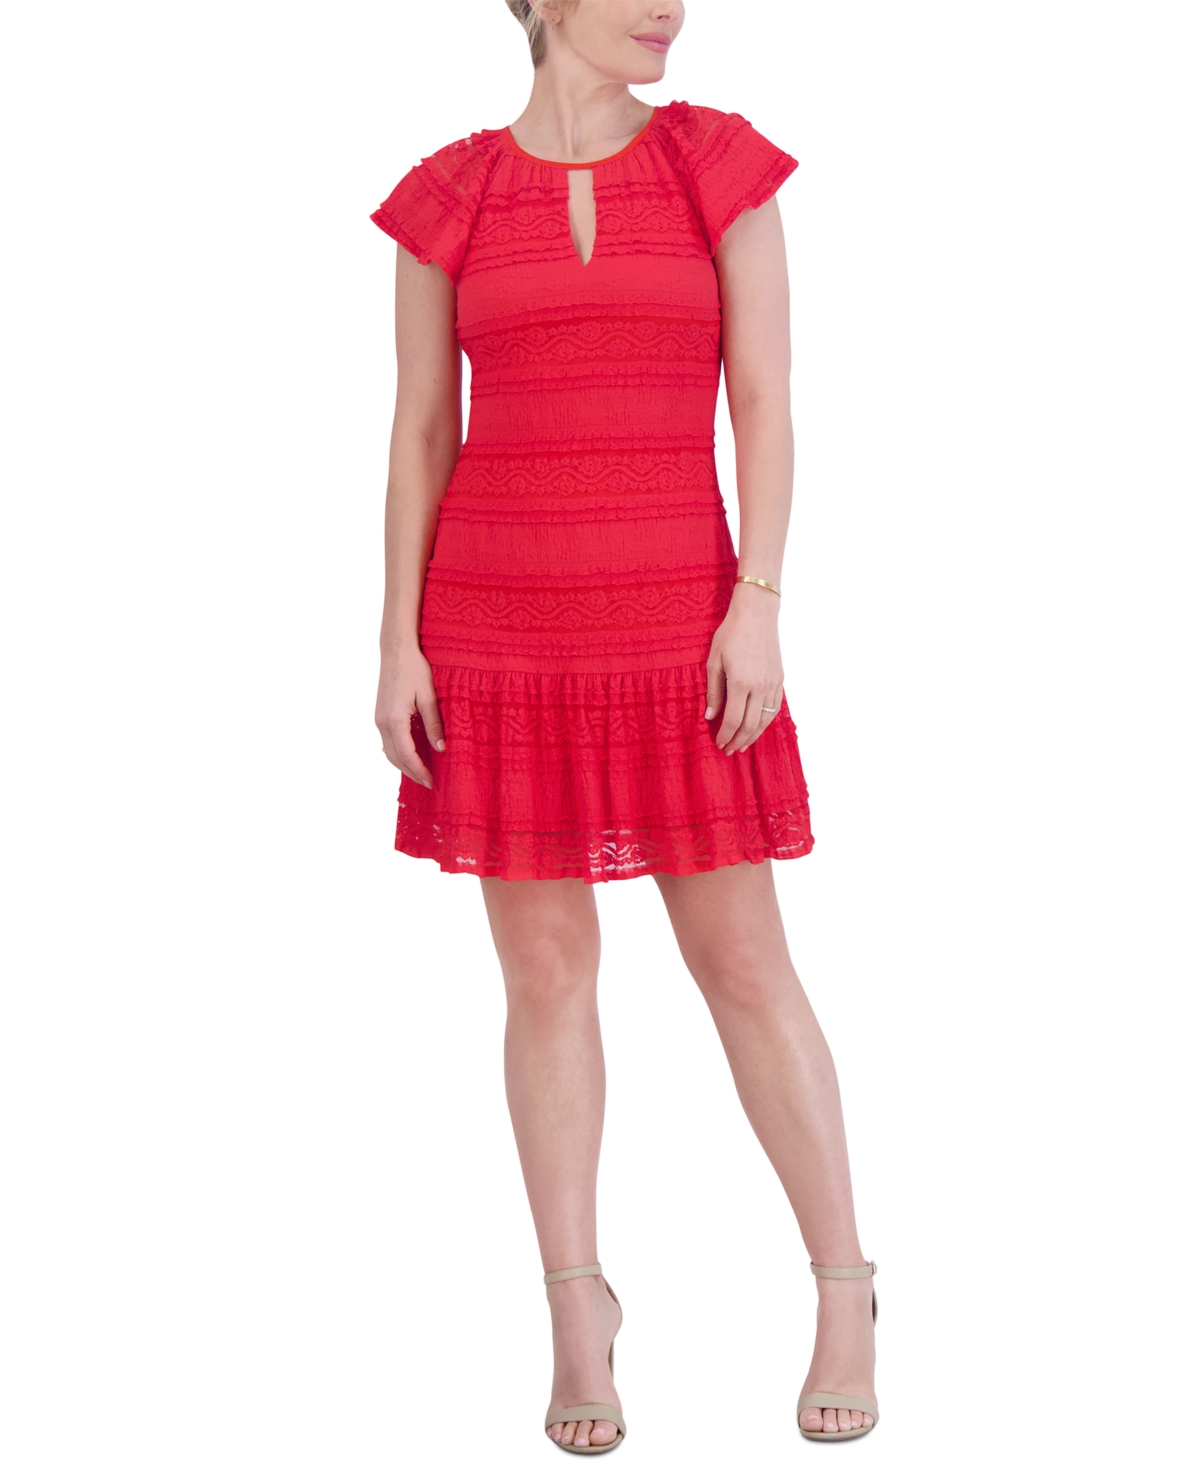 Petite Round-Neck Short-Sleeve Lace Dress - Red